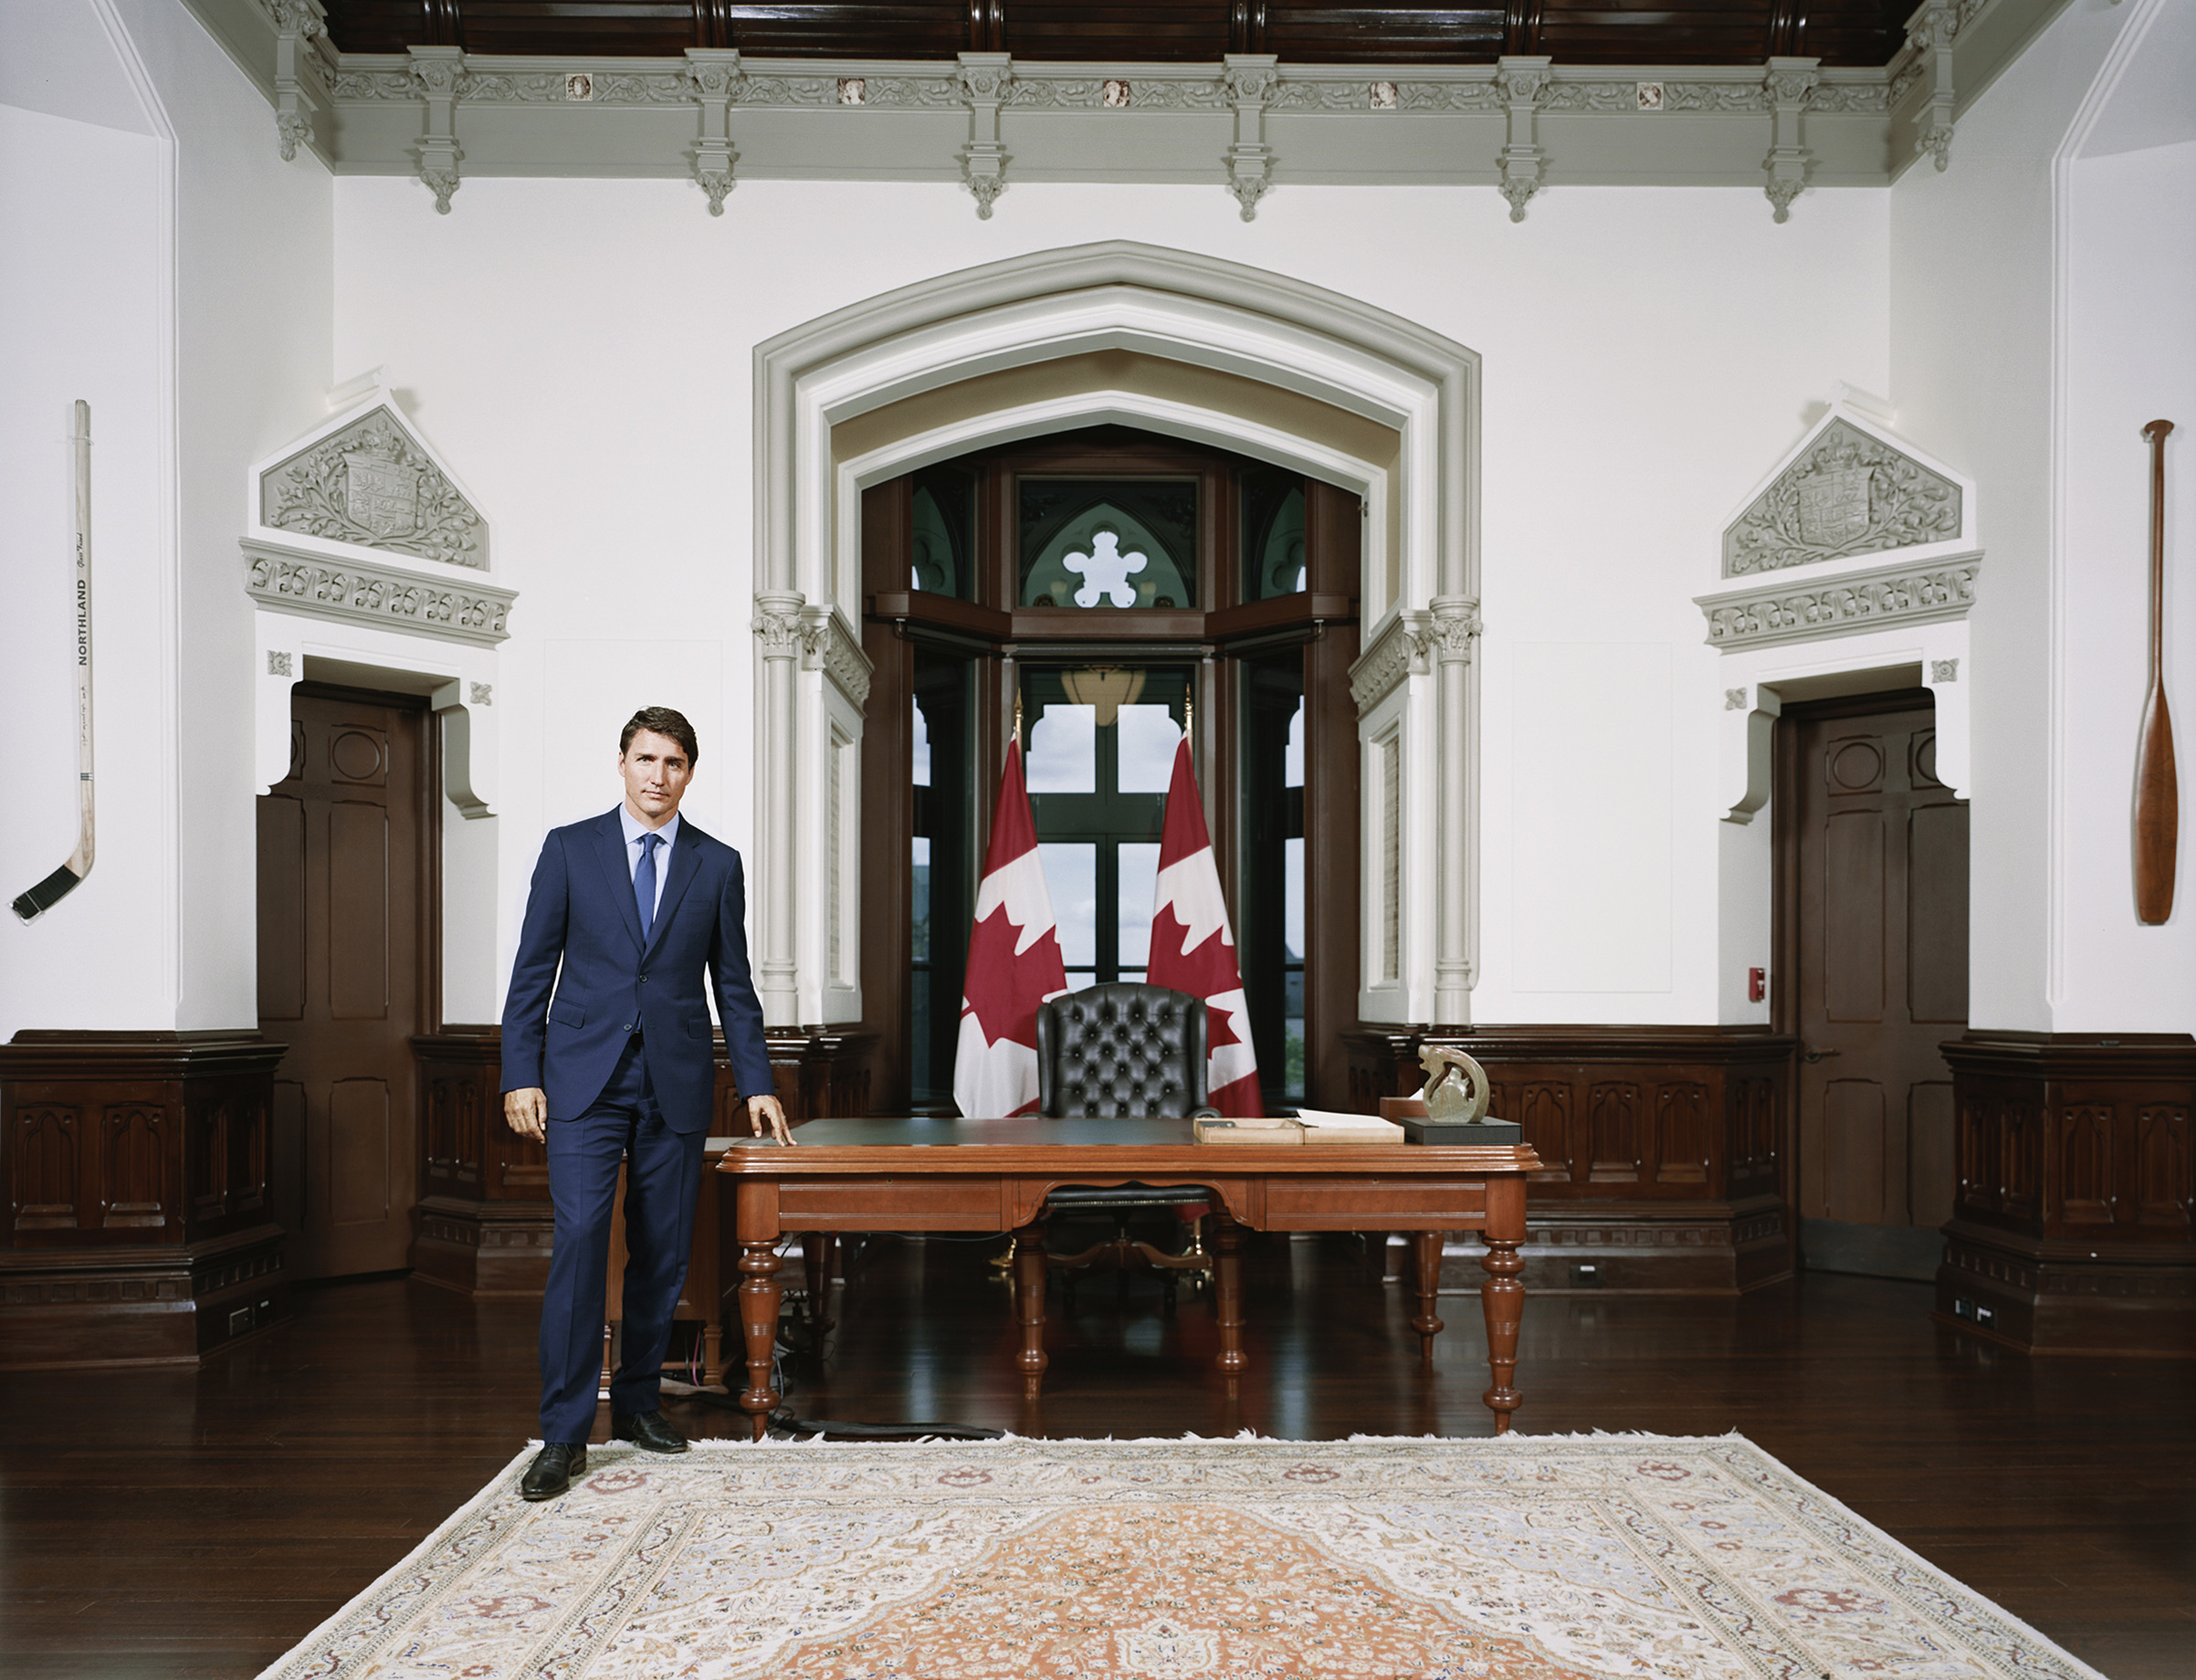 Canadian Prime Minister Justin Trudeau. "The Reckoning," Oct. 7 issue. (Stefan Ruiz for TIME)